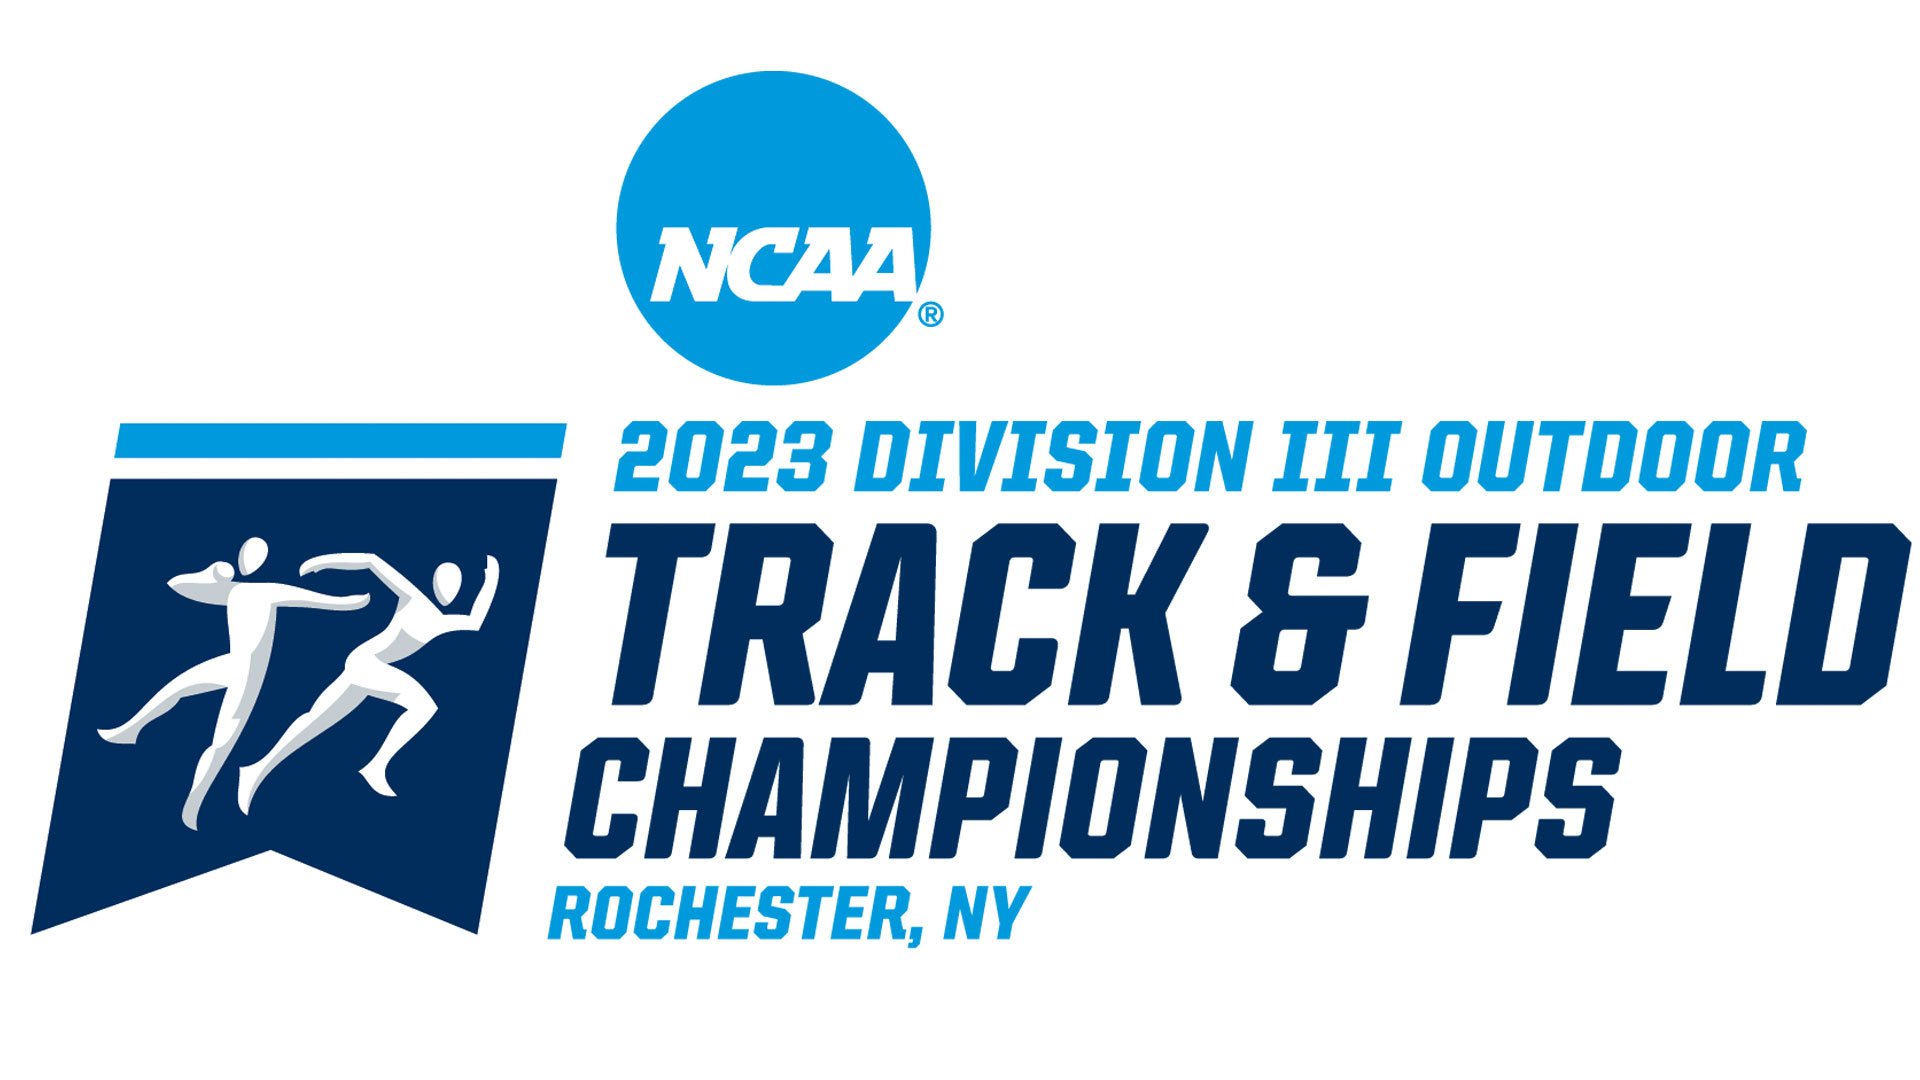 Barre Repeats as Invitee to NCAA Women’s Outdoor Track and Field Championships